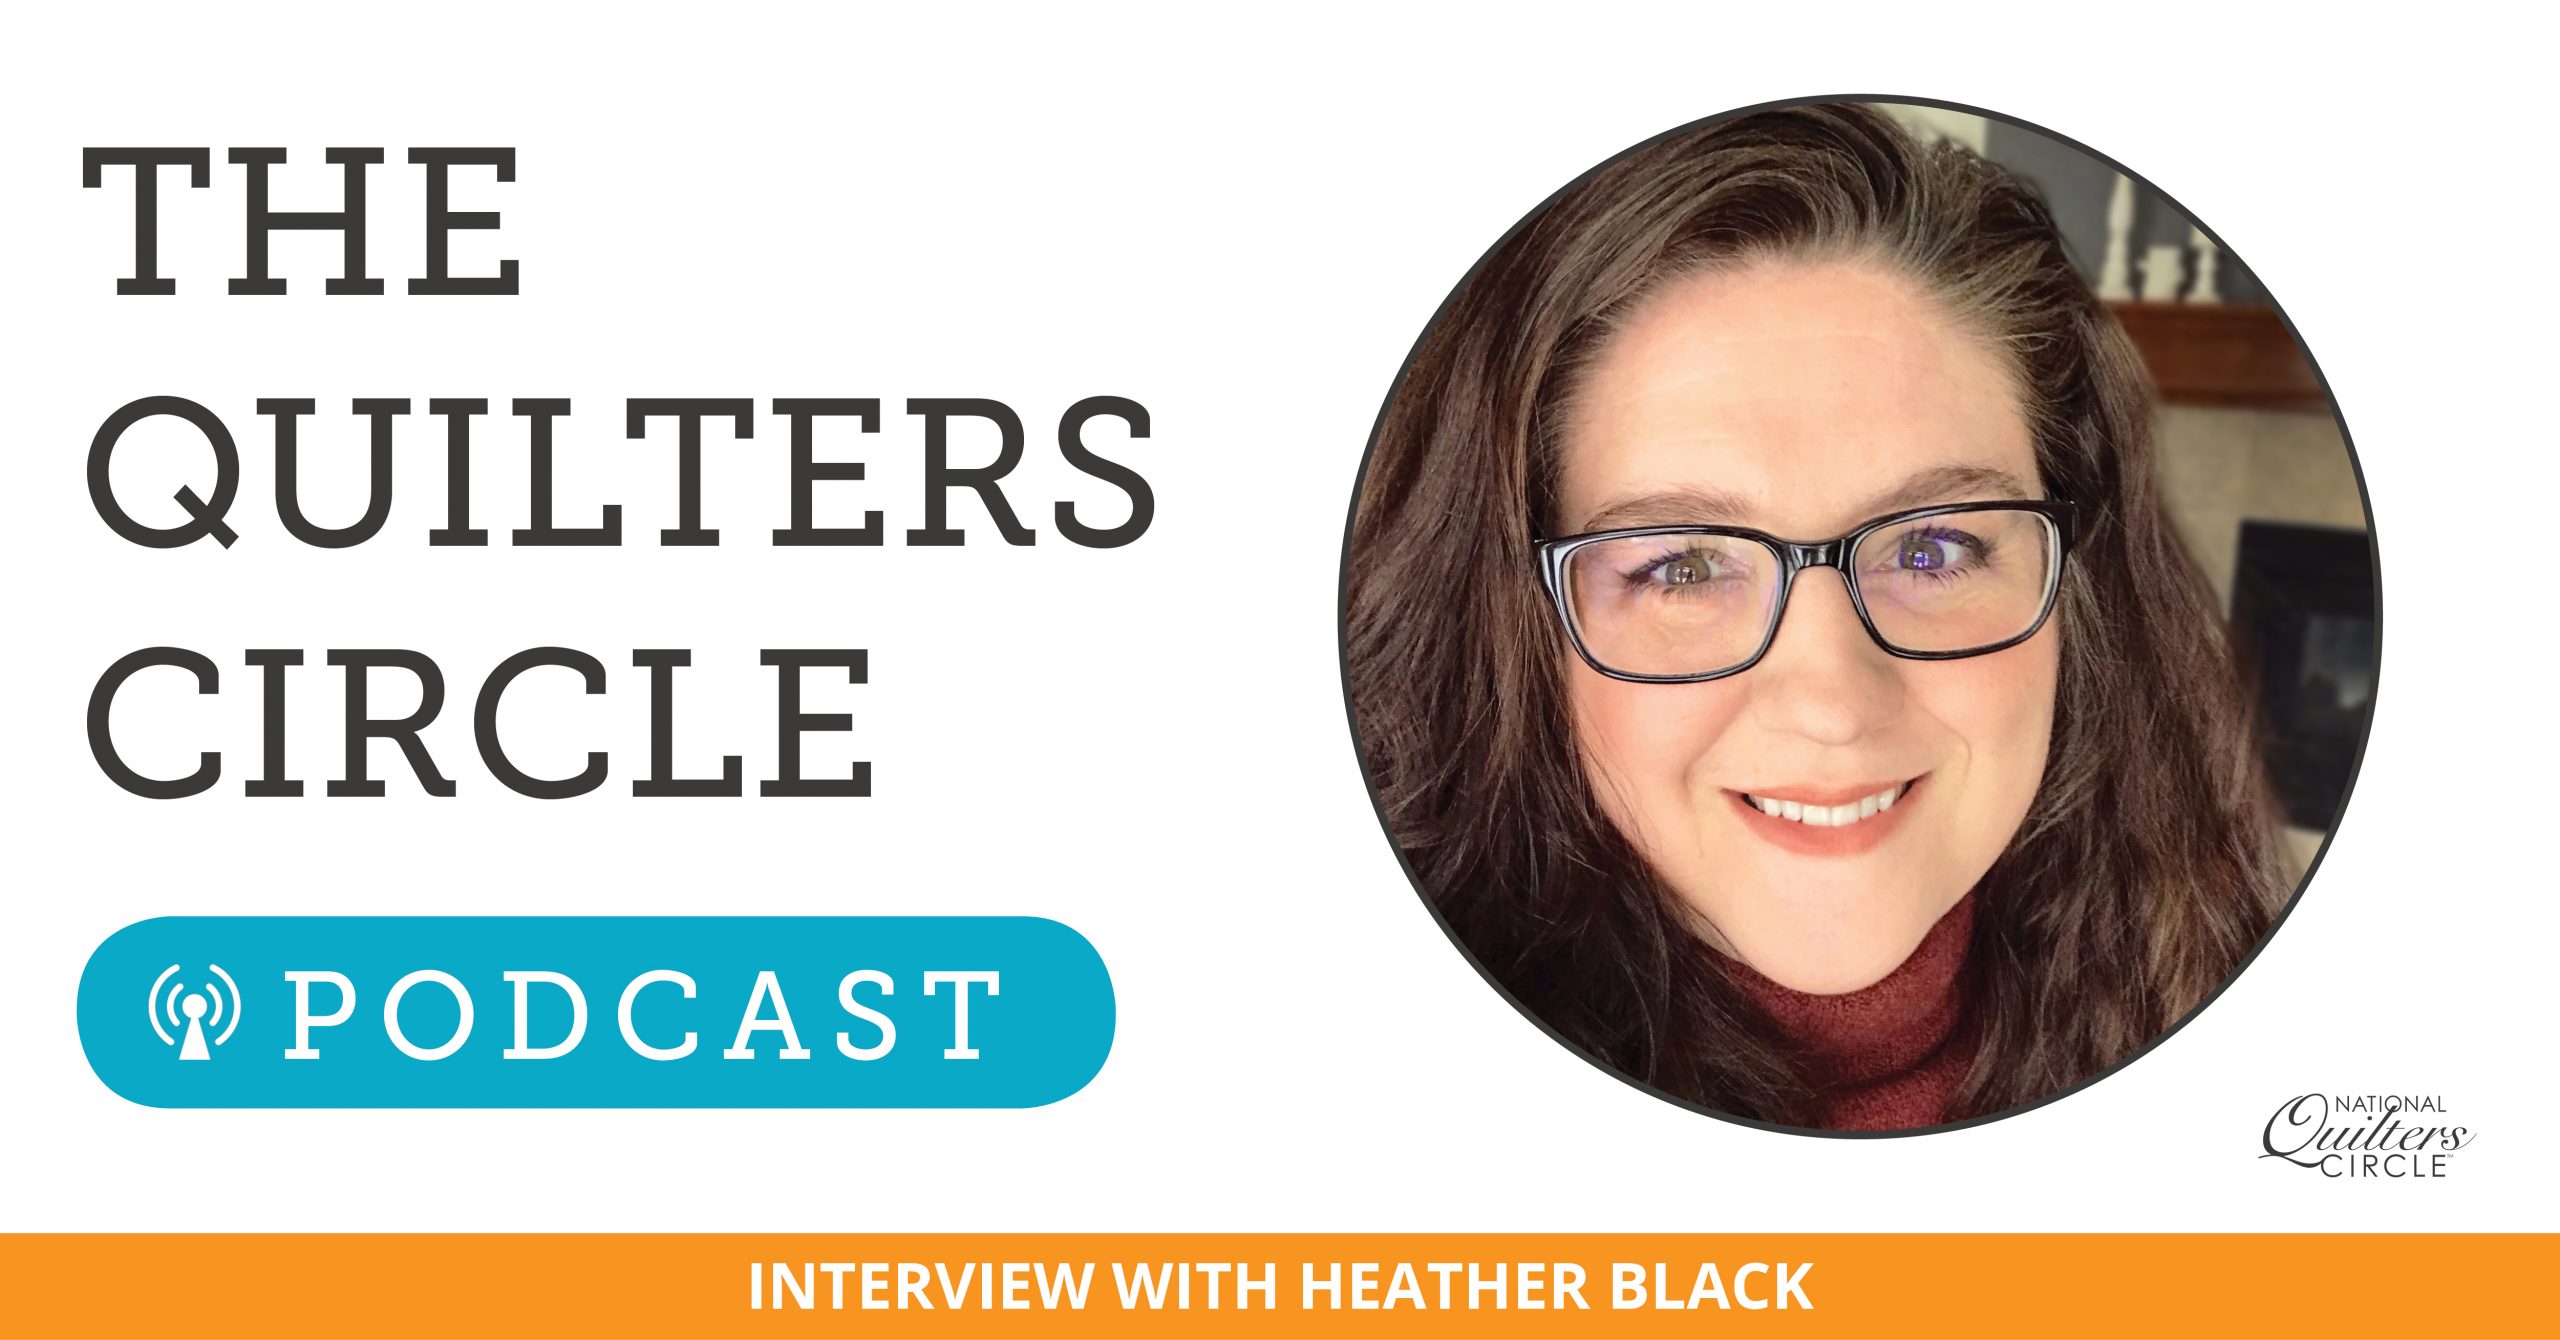 The quilter's circle podcast with a woman smiling